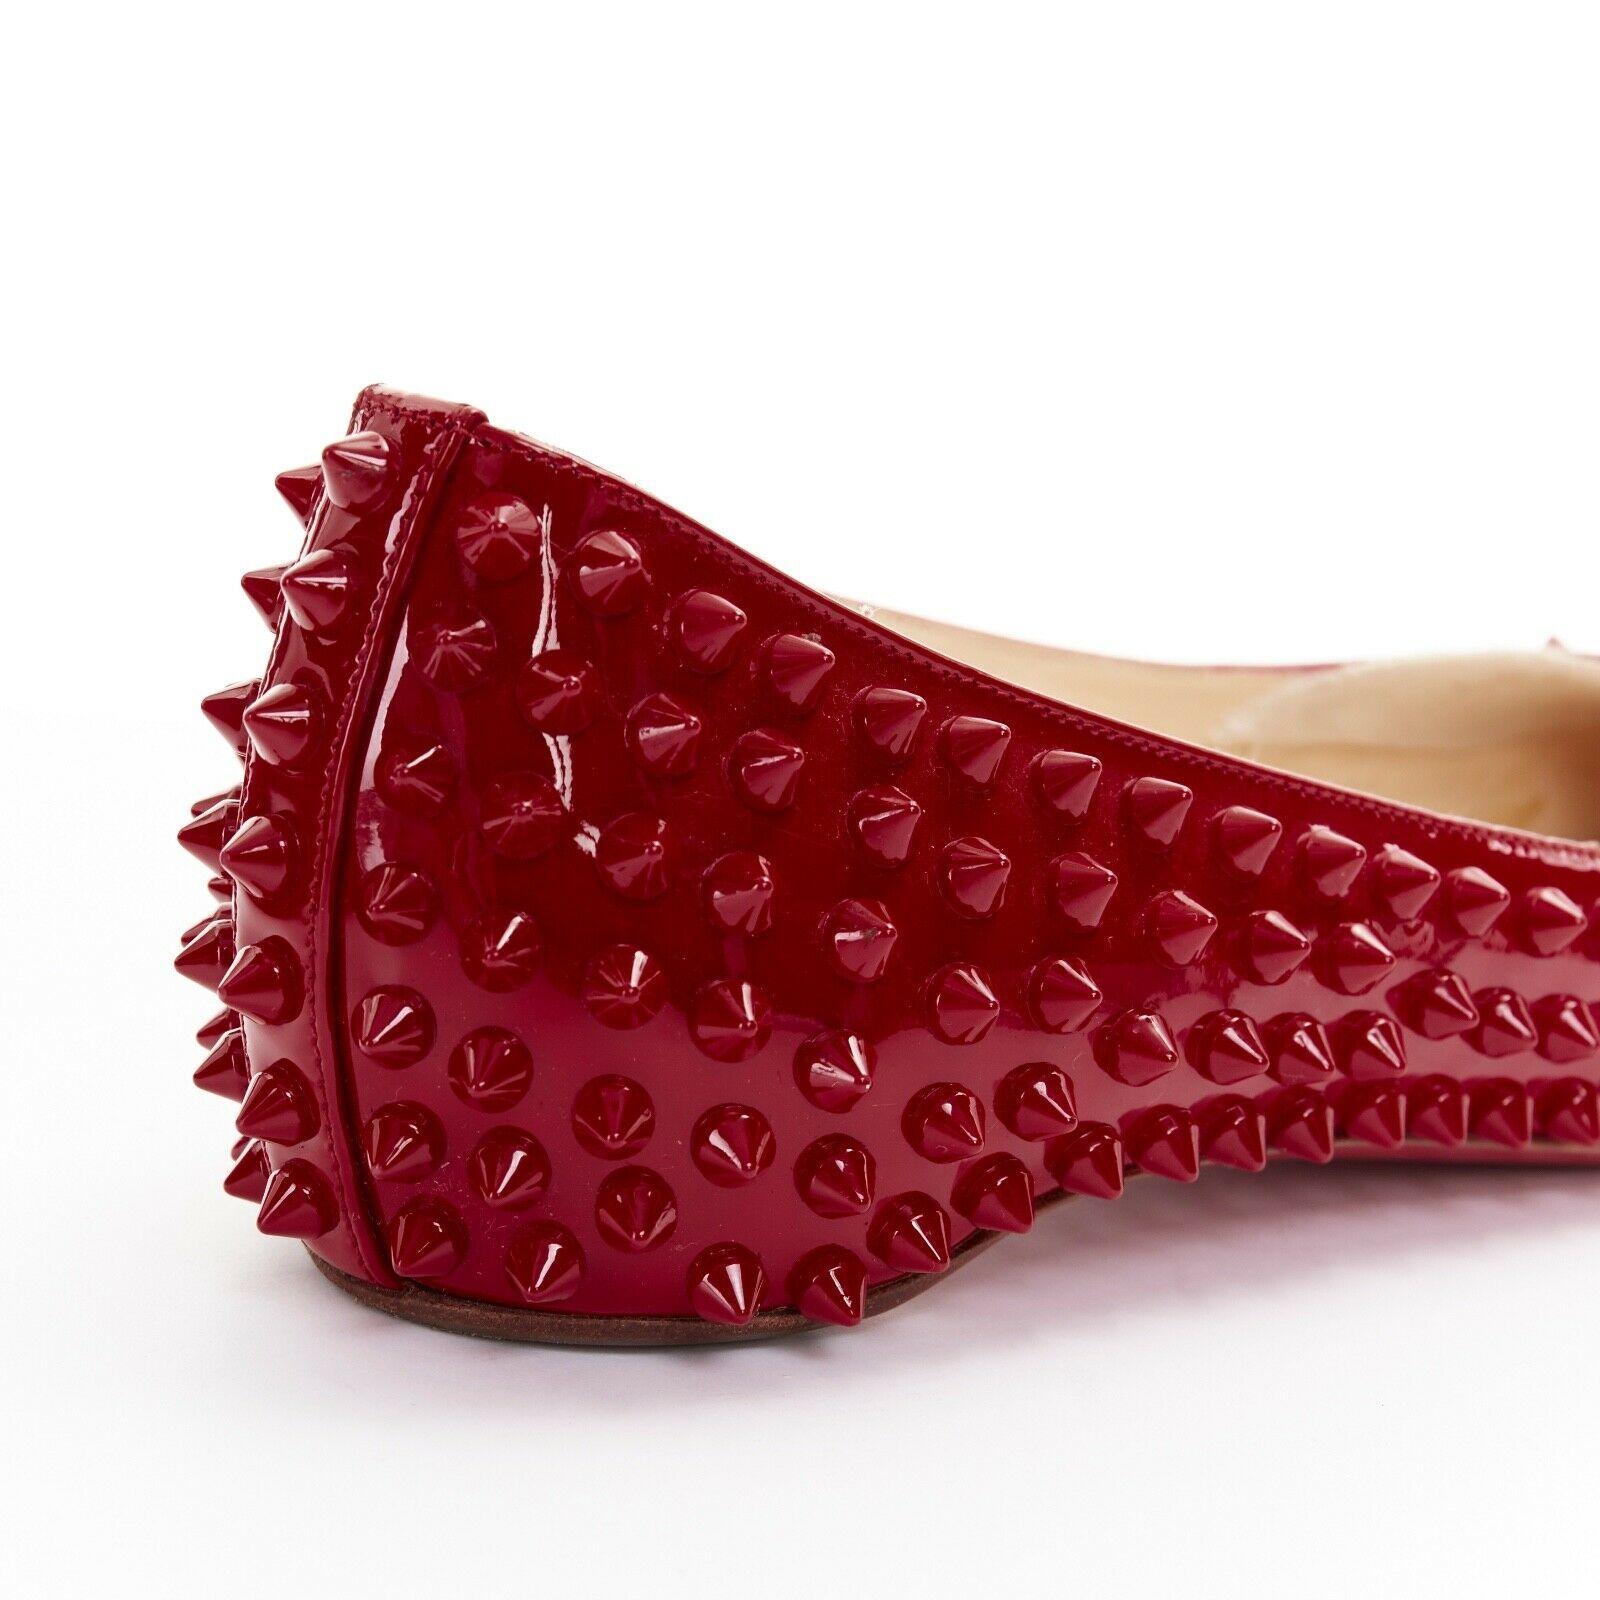 CHRISTIAN LOUBOUTIN Pigalle Spikes red patent studded pointy flats EU38.5 1